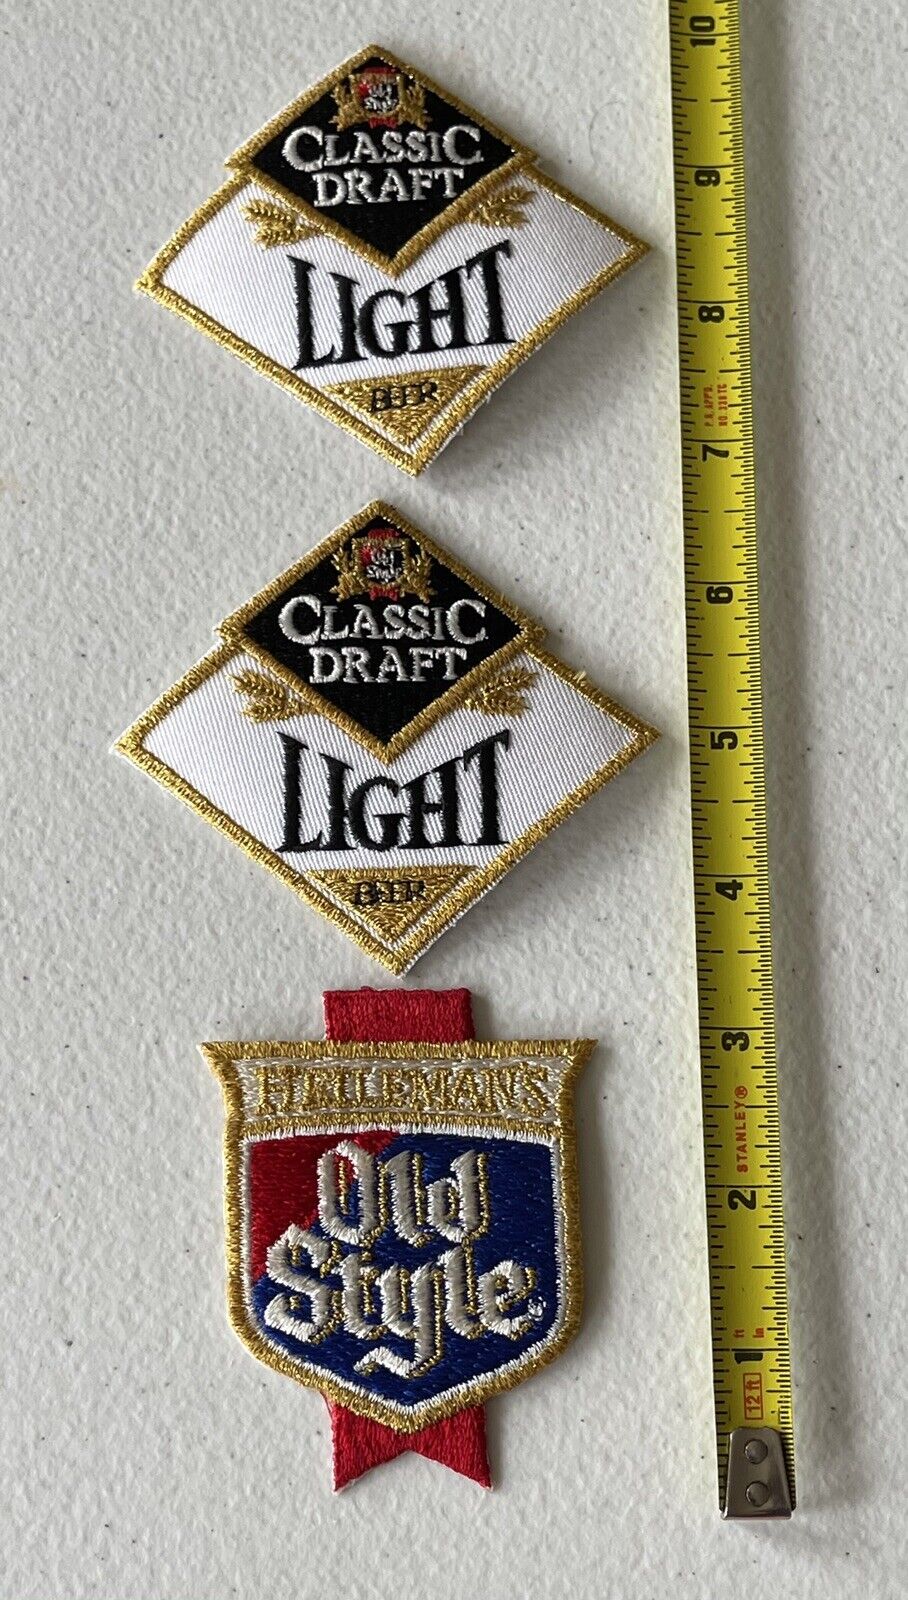 Vintage 0ld Style Beer Jacket Patches - New  - Lot Of 3